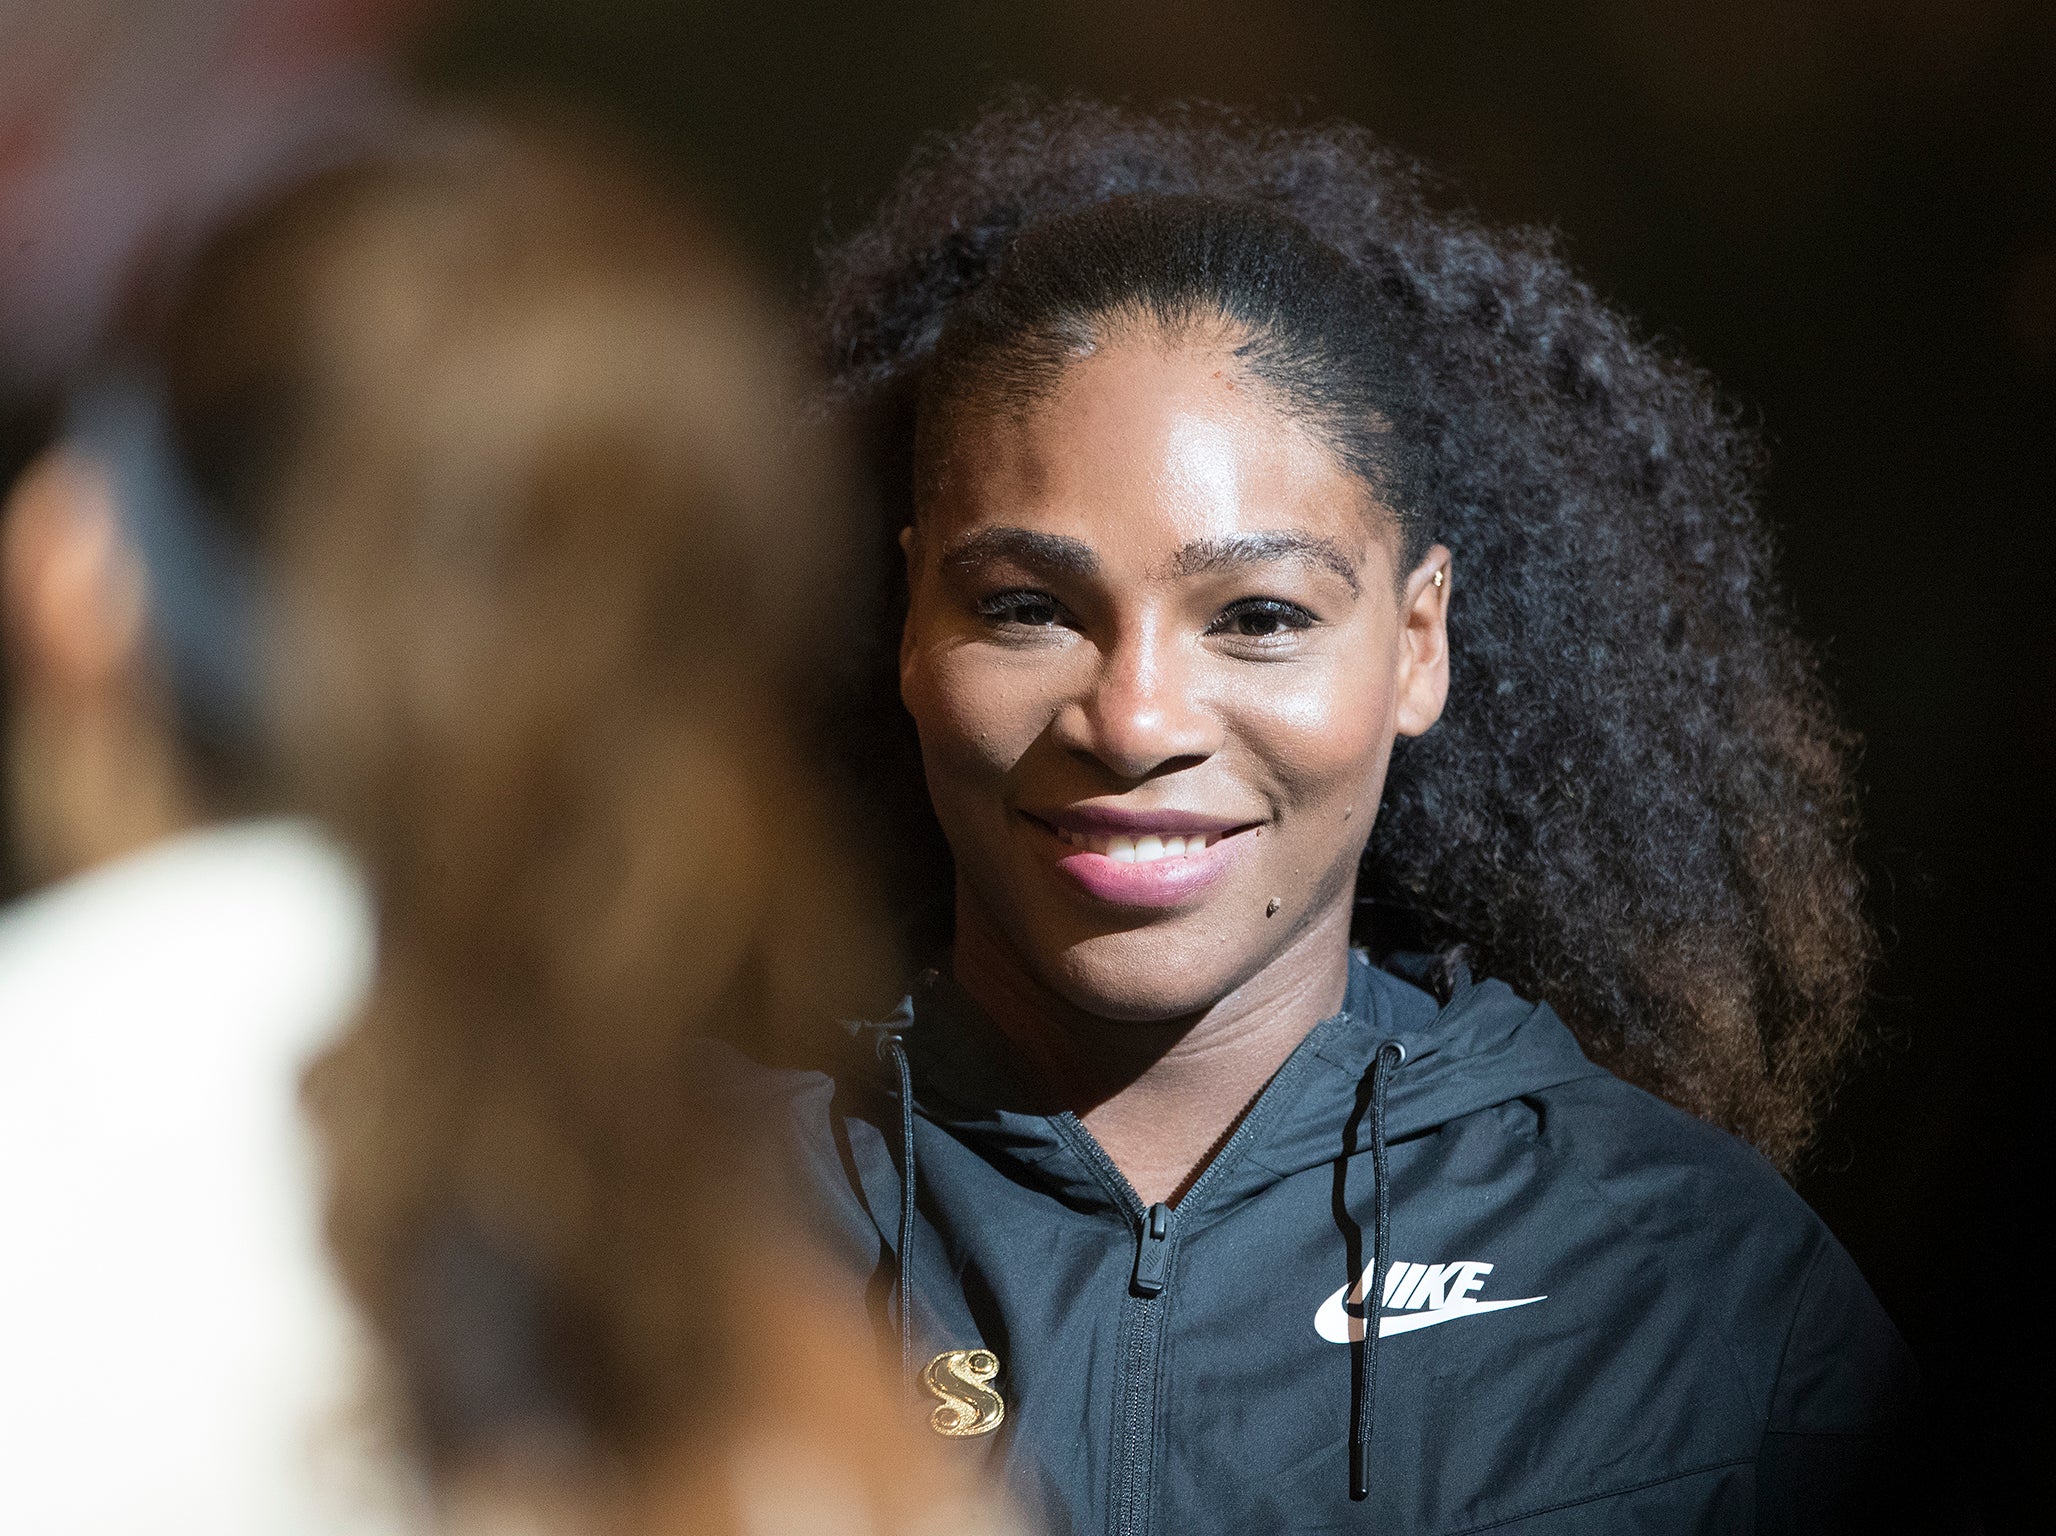 Serena Williams has not played a competitive match since winning the Australian Open